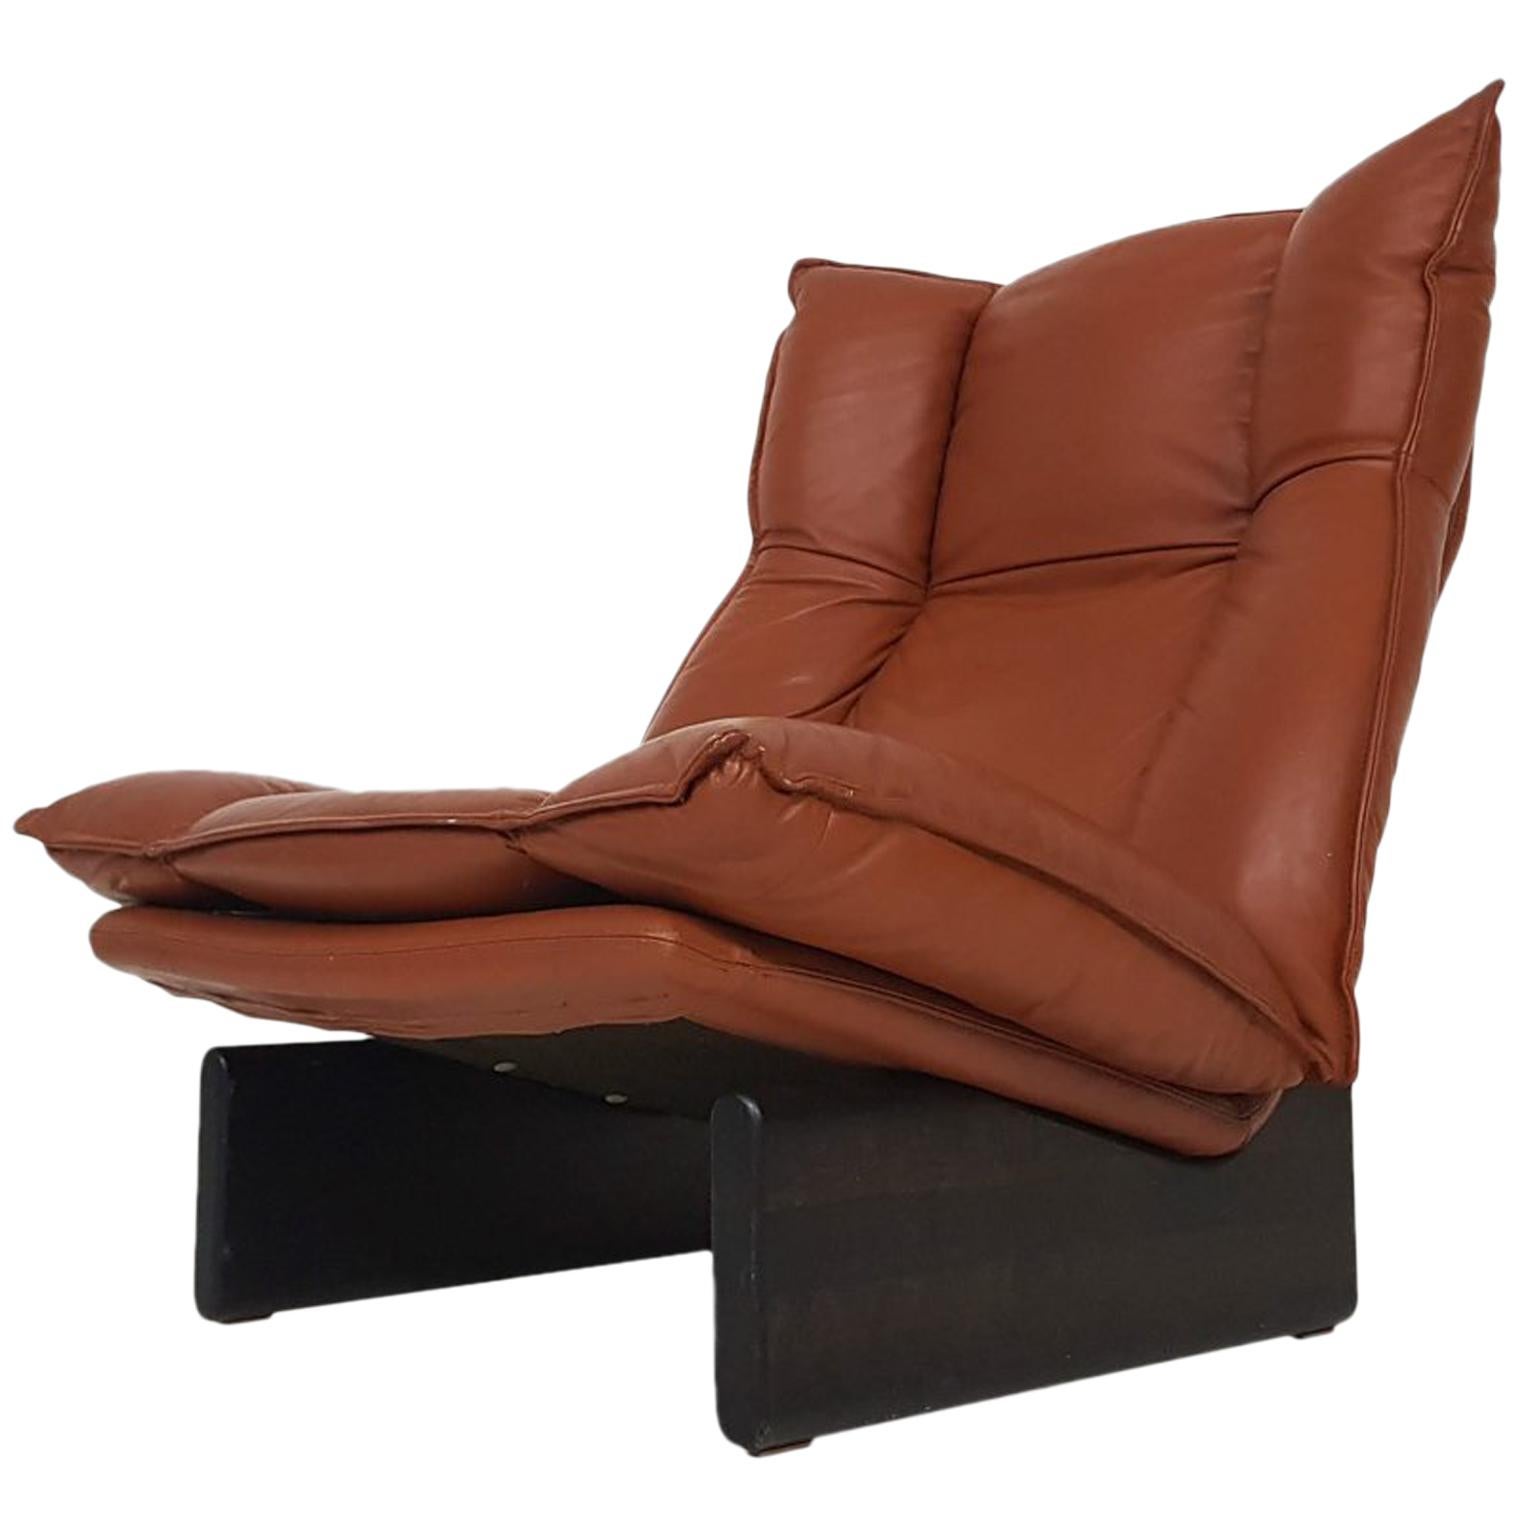 Leather and Wood Lounge Chair by Leolux, Dutch Modern Design, 1970s